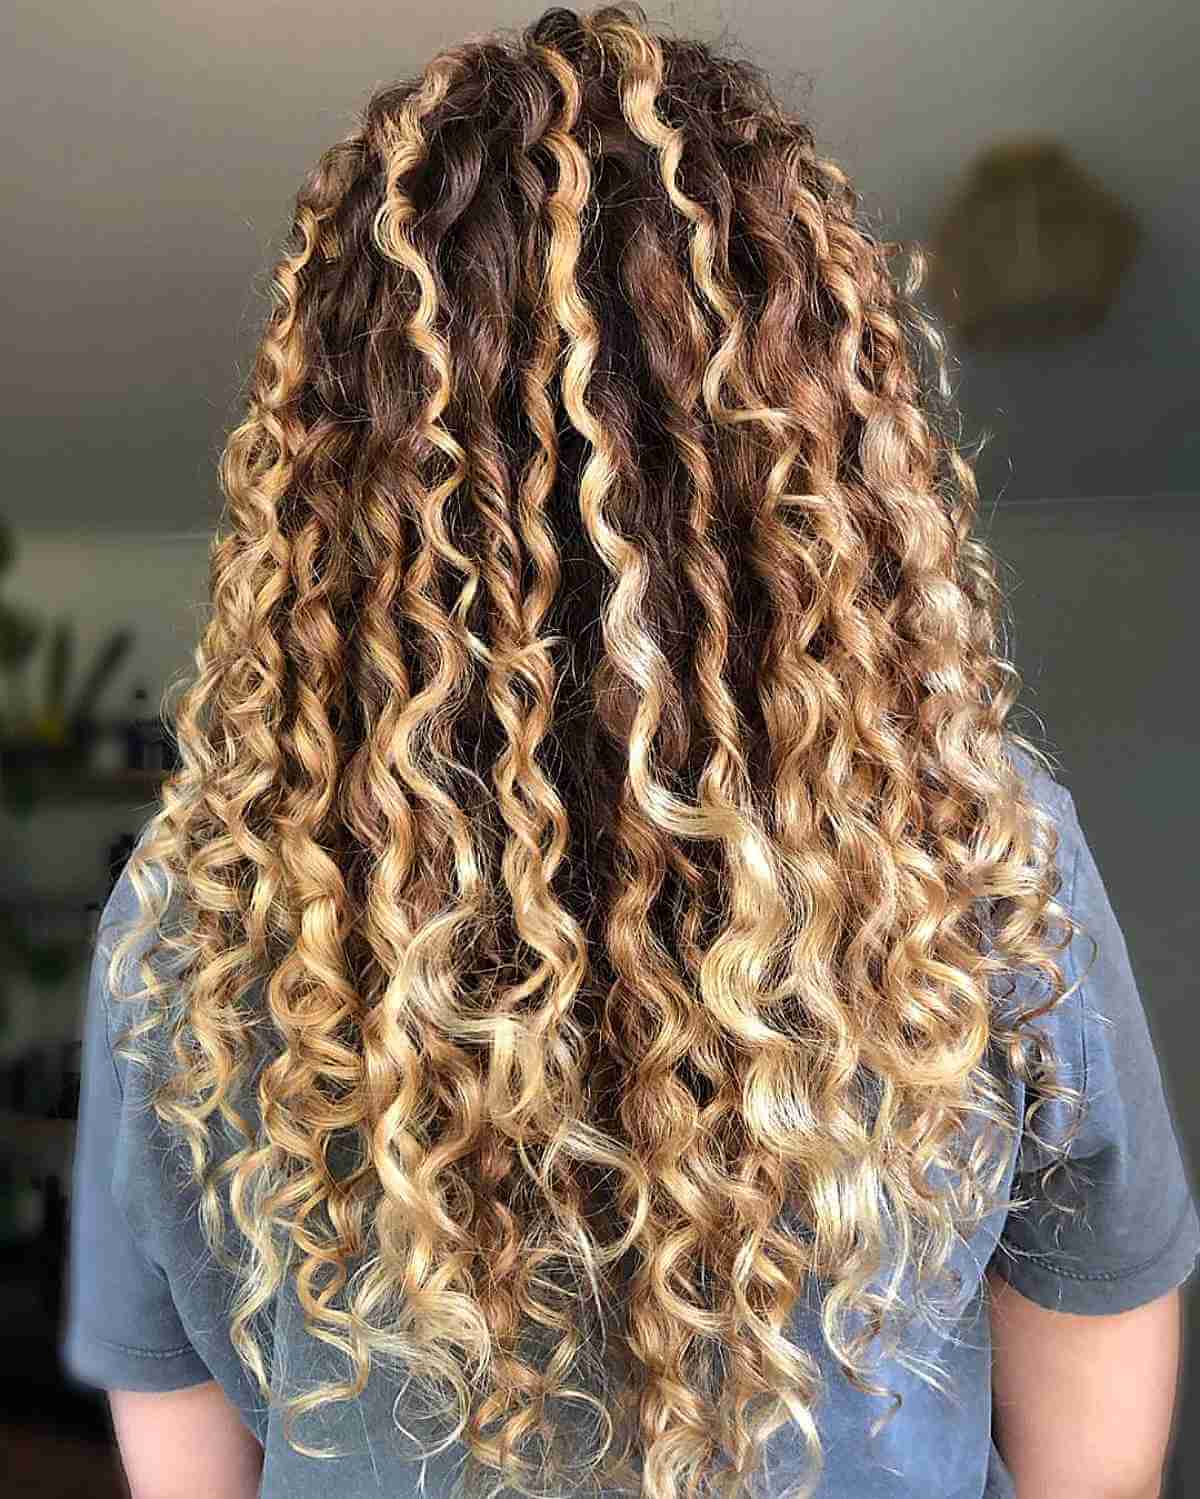 Blonde balayage with curls